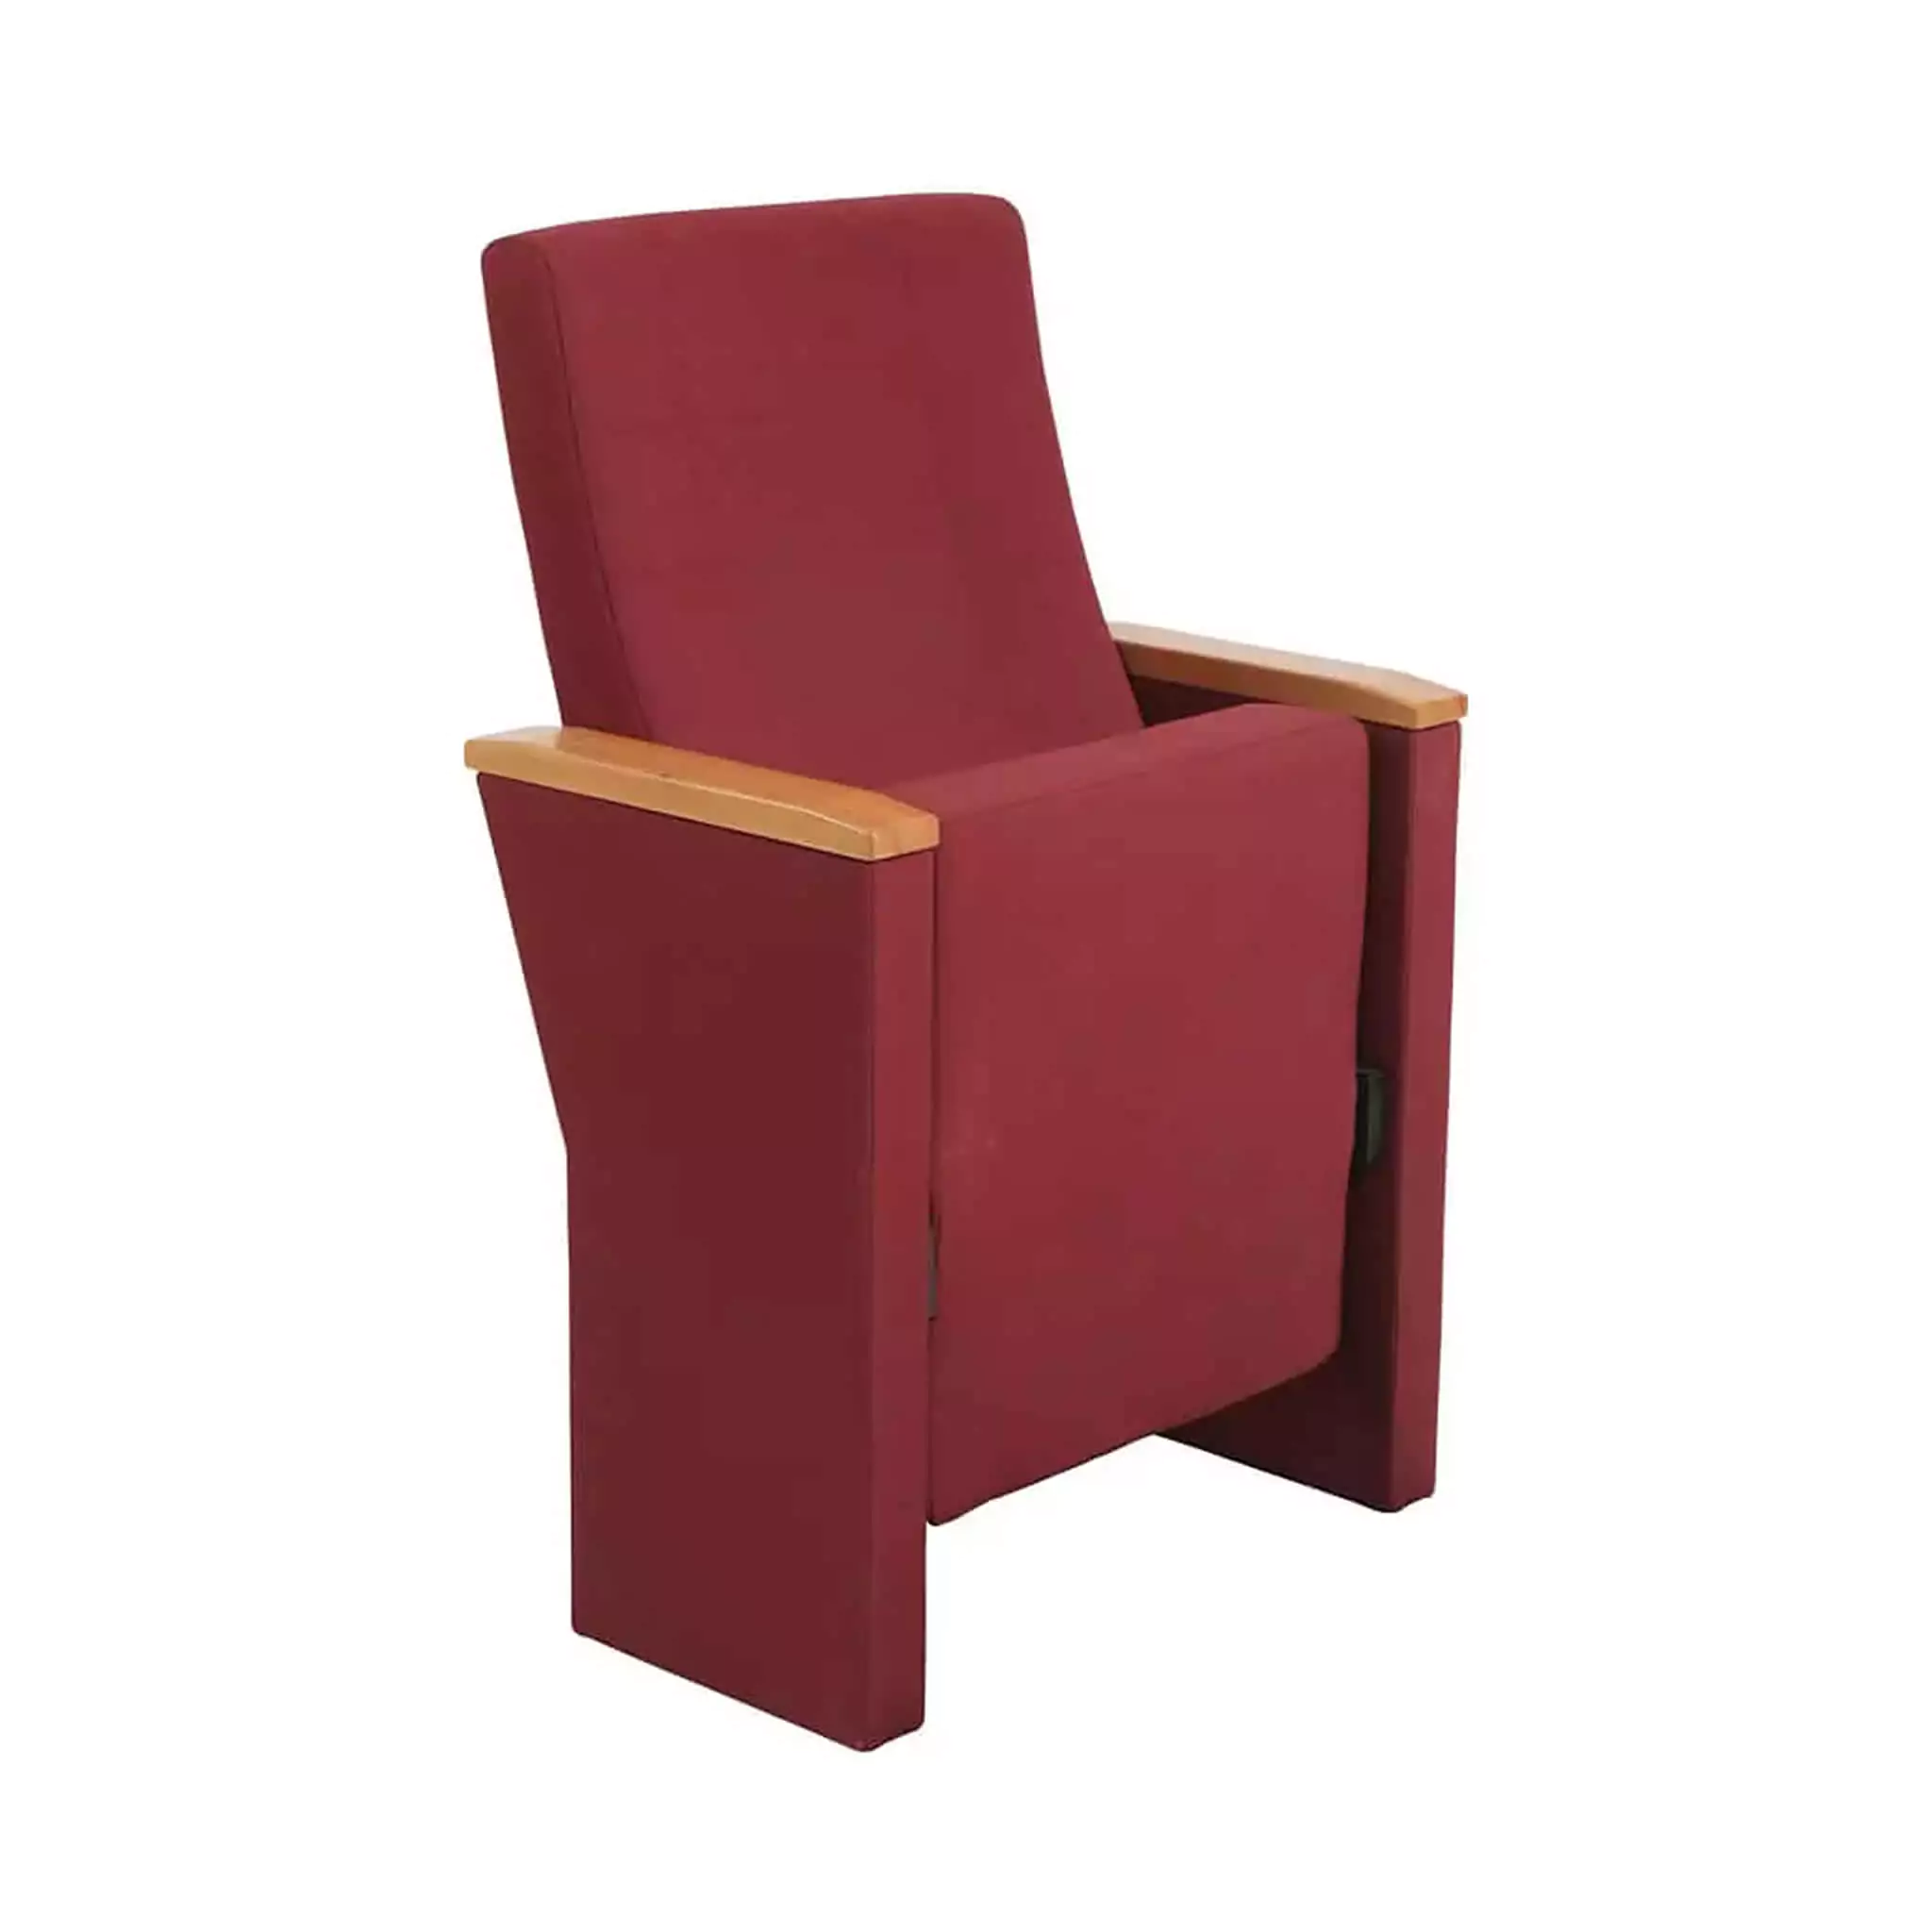 Simko Seating Products Conference Seat Safir S 05